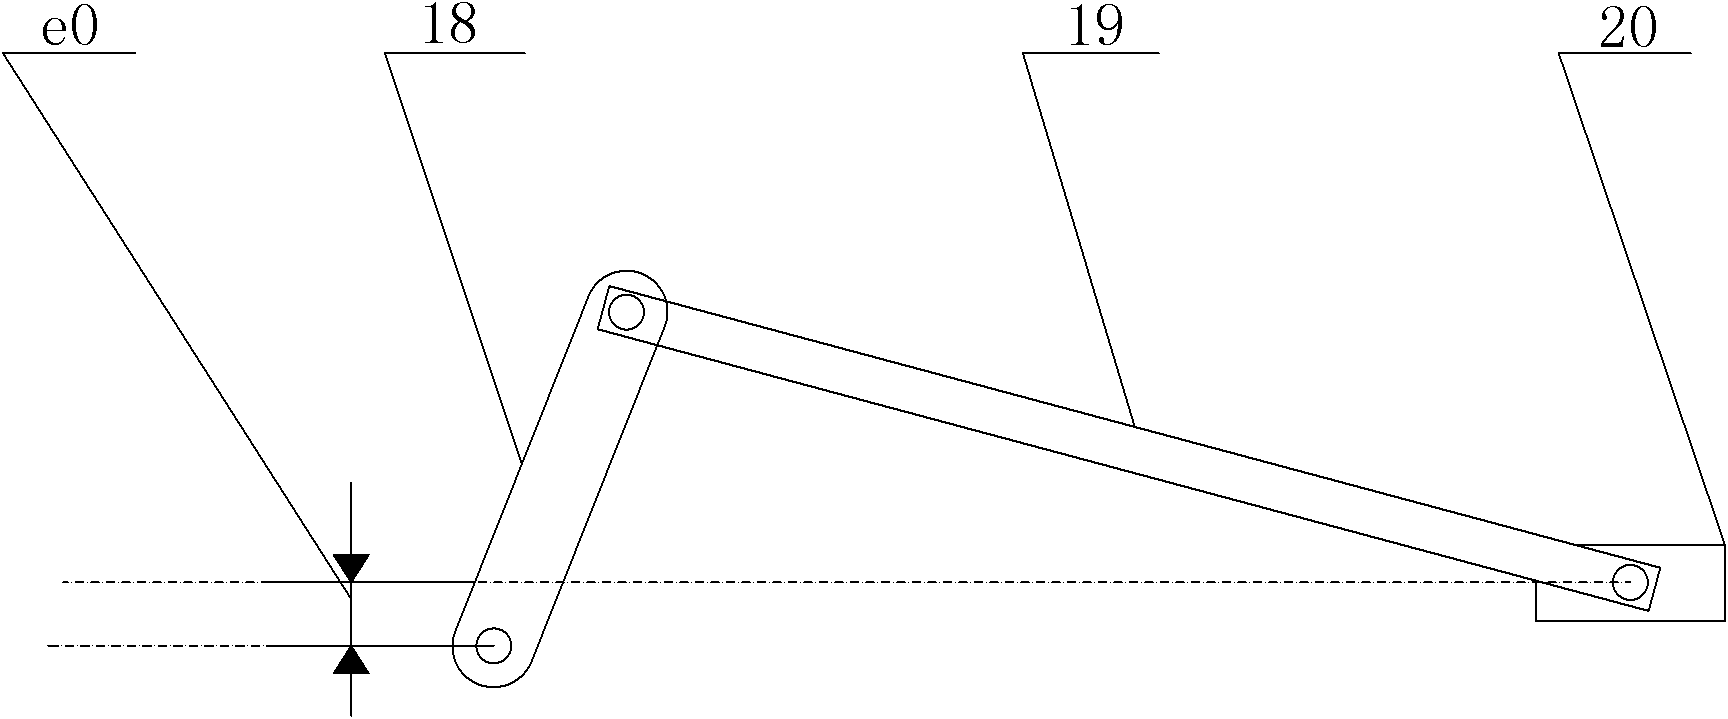 Horizontal adaptive mechanical precision straightening device for linear bars